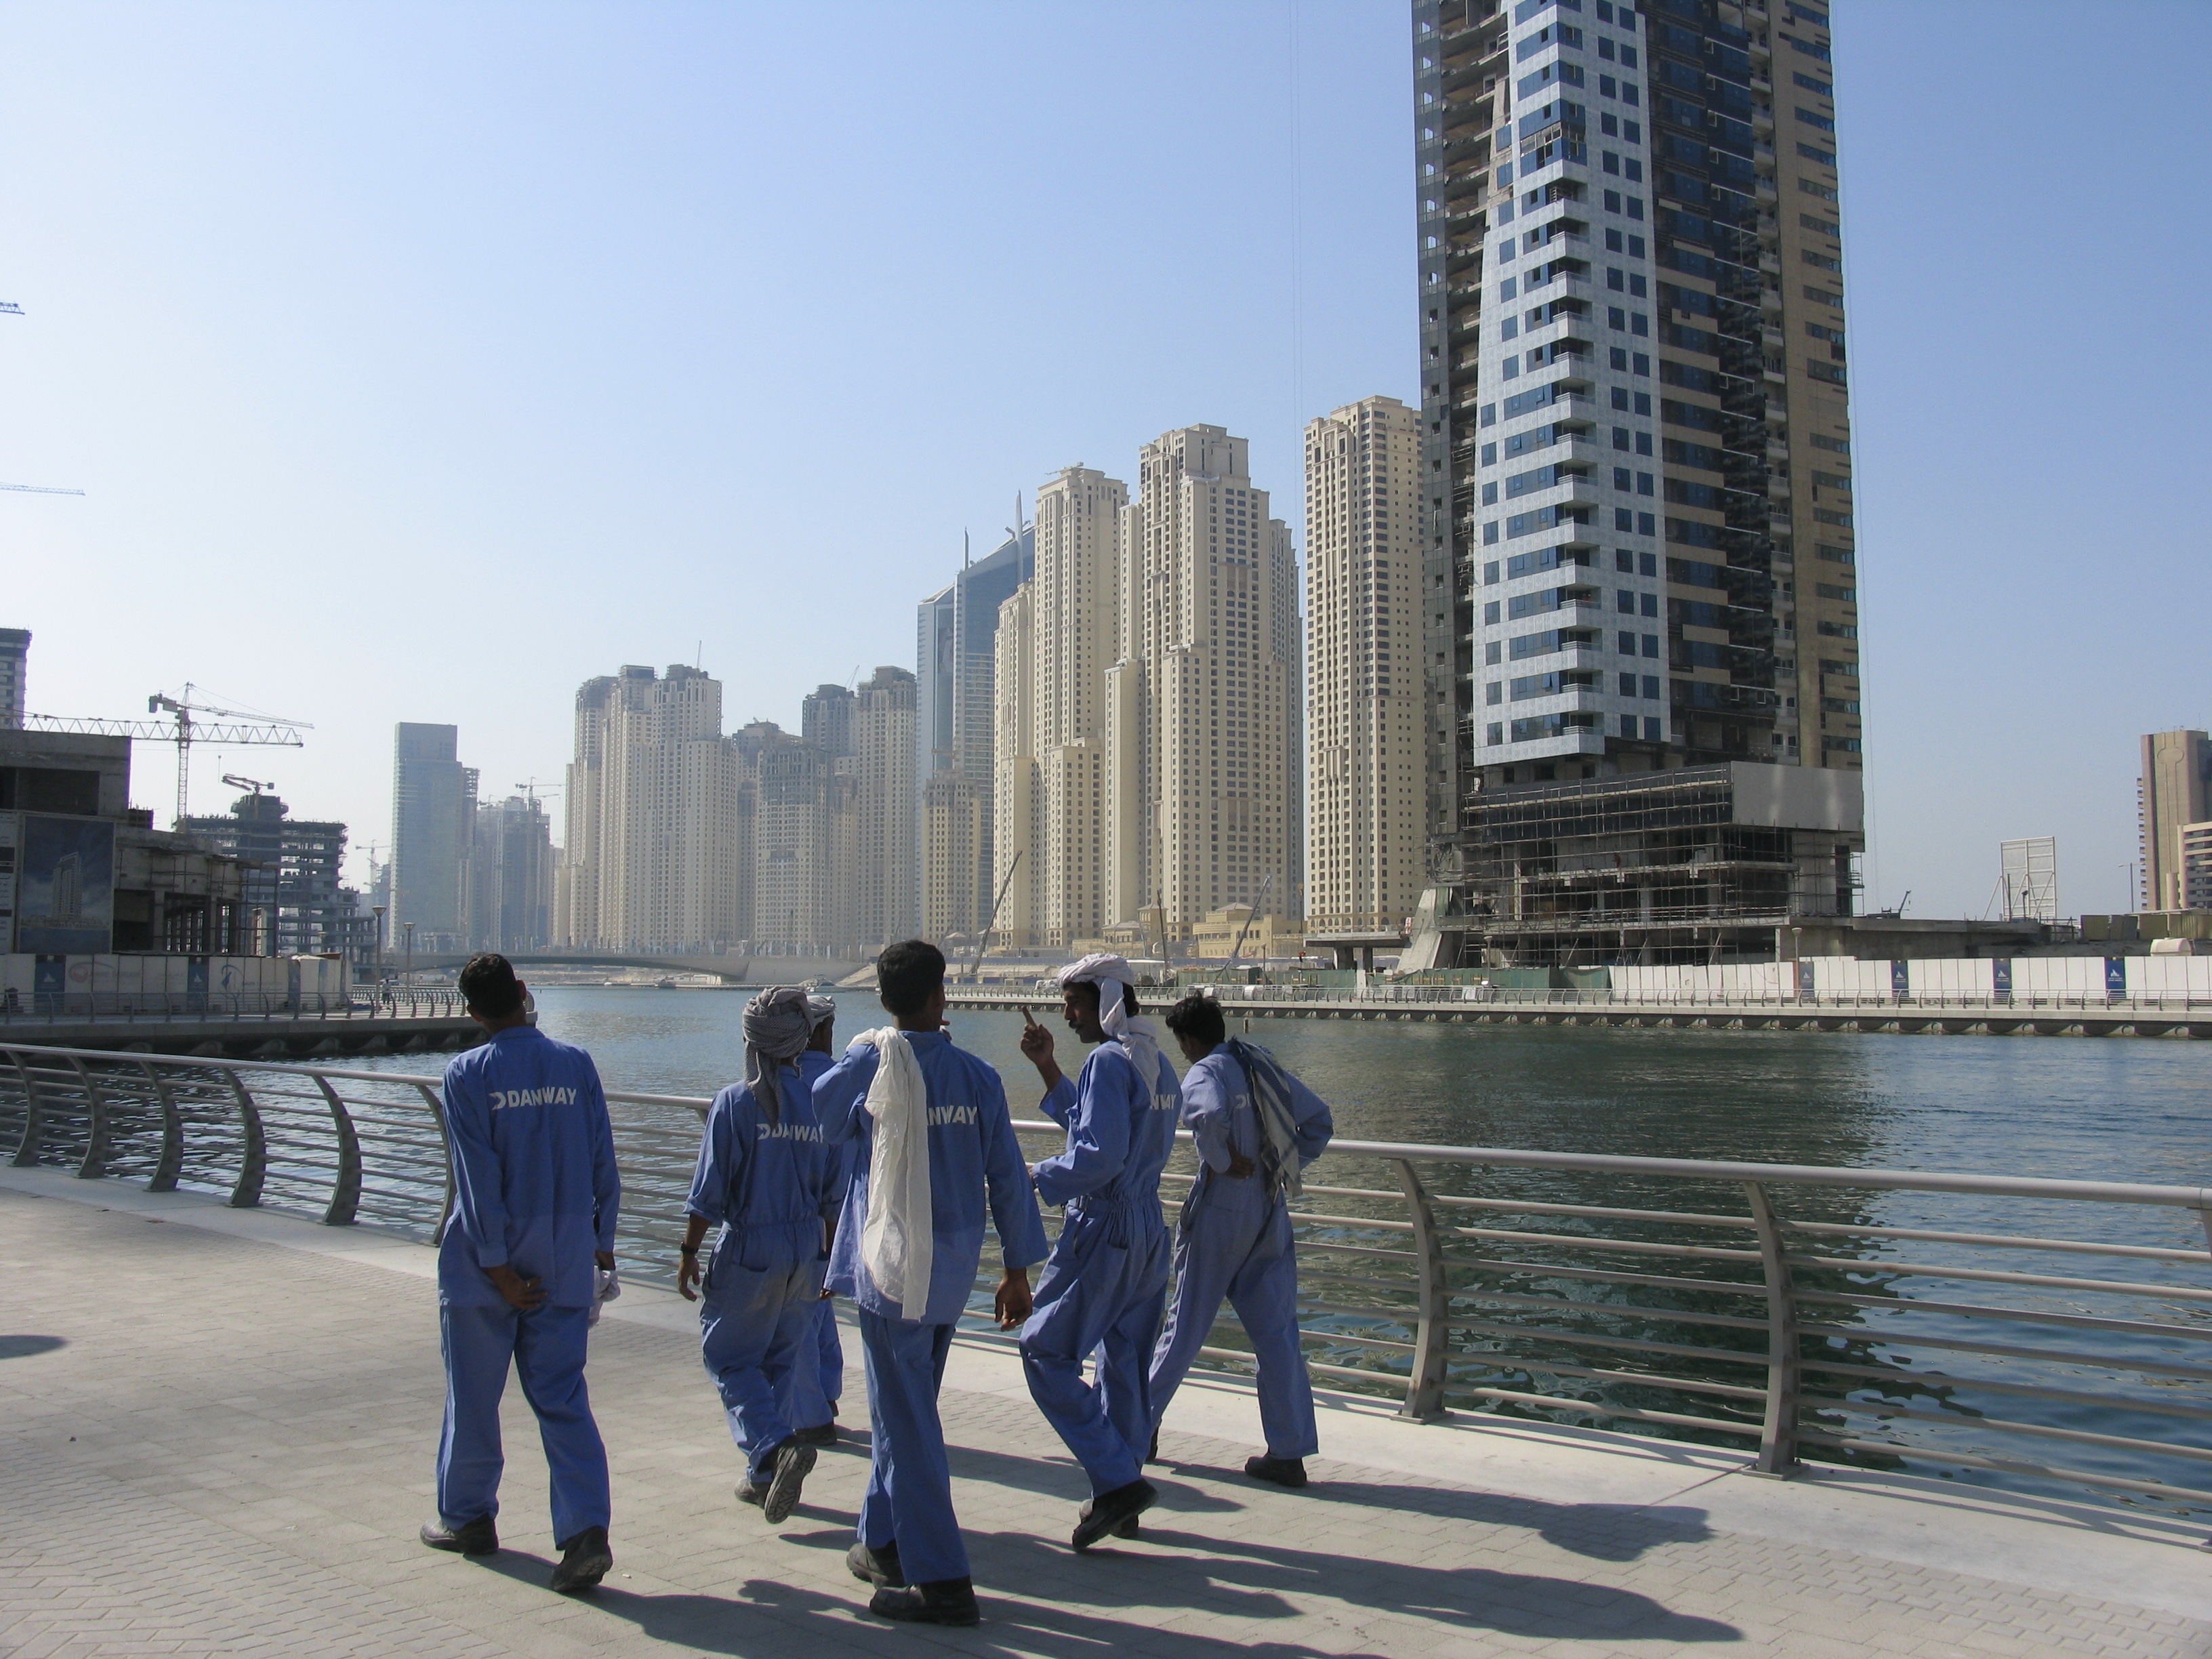 Migrant construction workers in Dubai (Source: Wikimedia Commons)